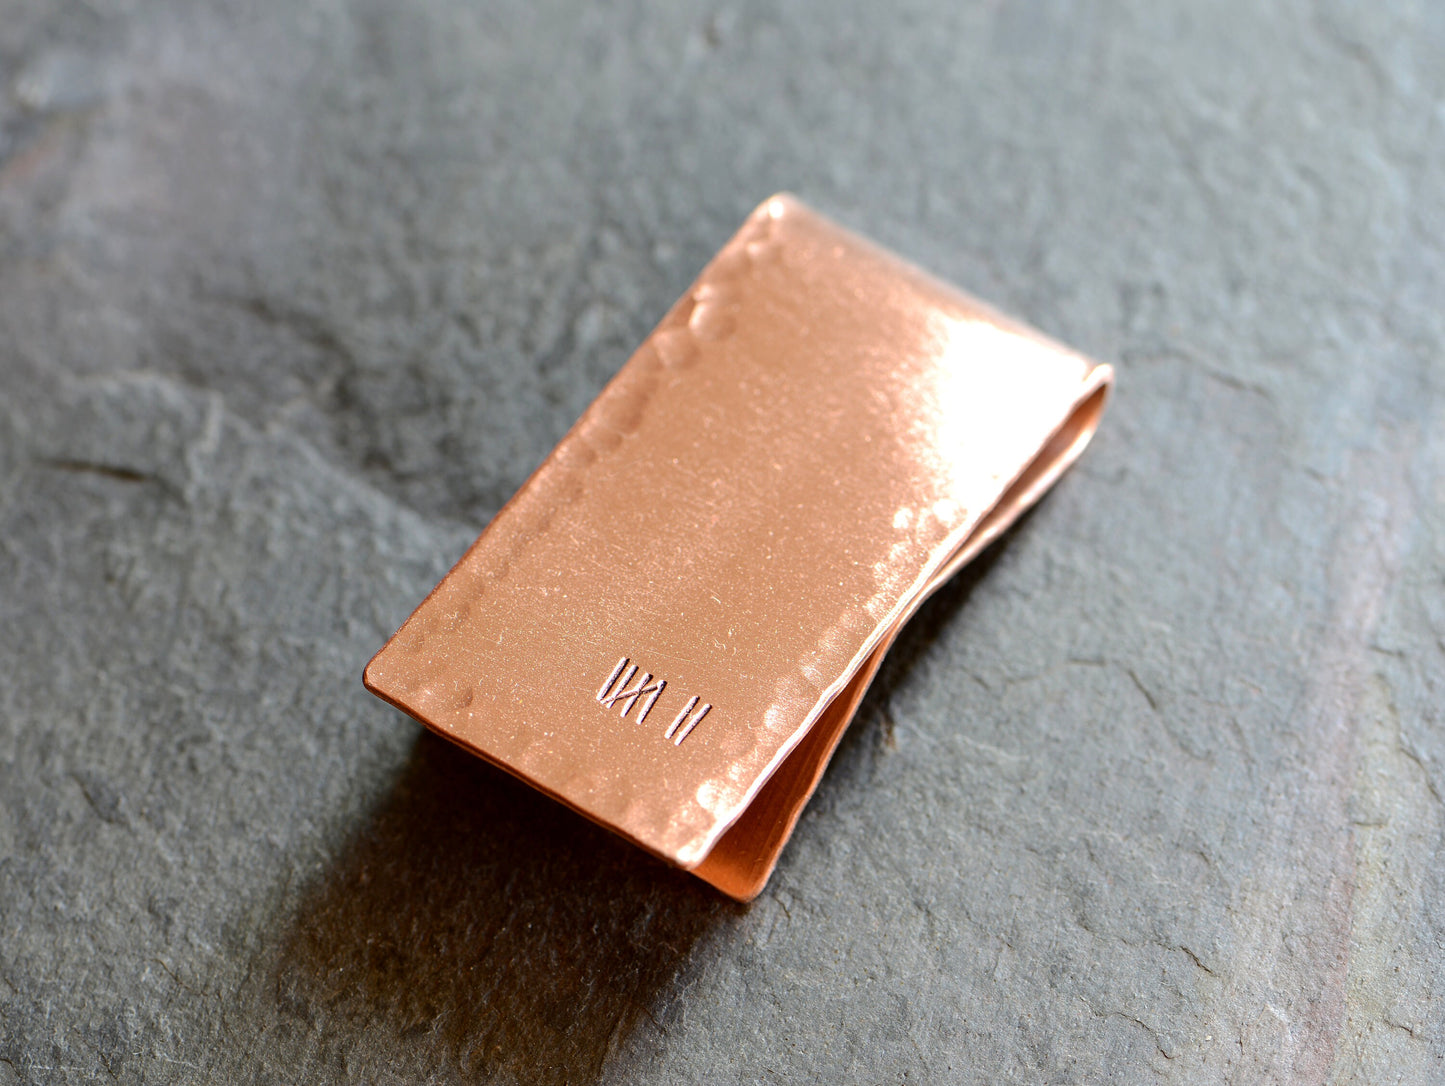 Copper money clip for the 7th anniversary with 7 tally marks to keep track